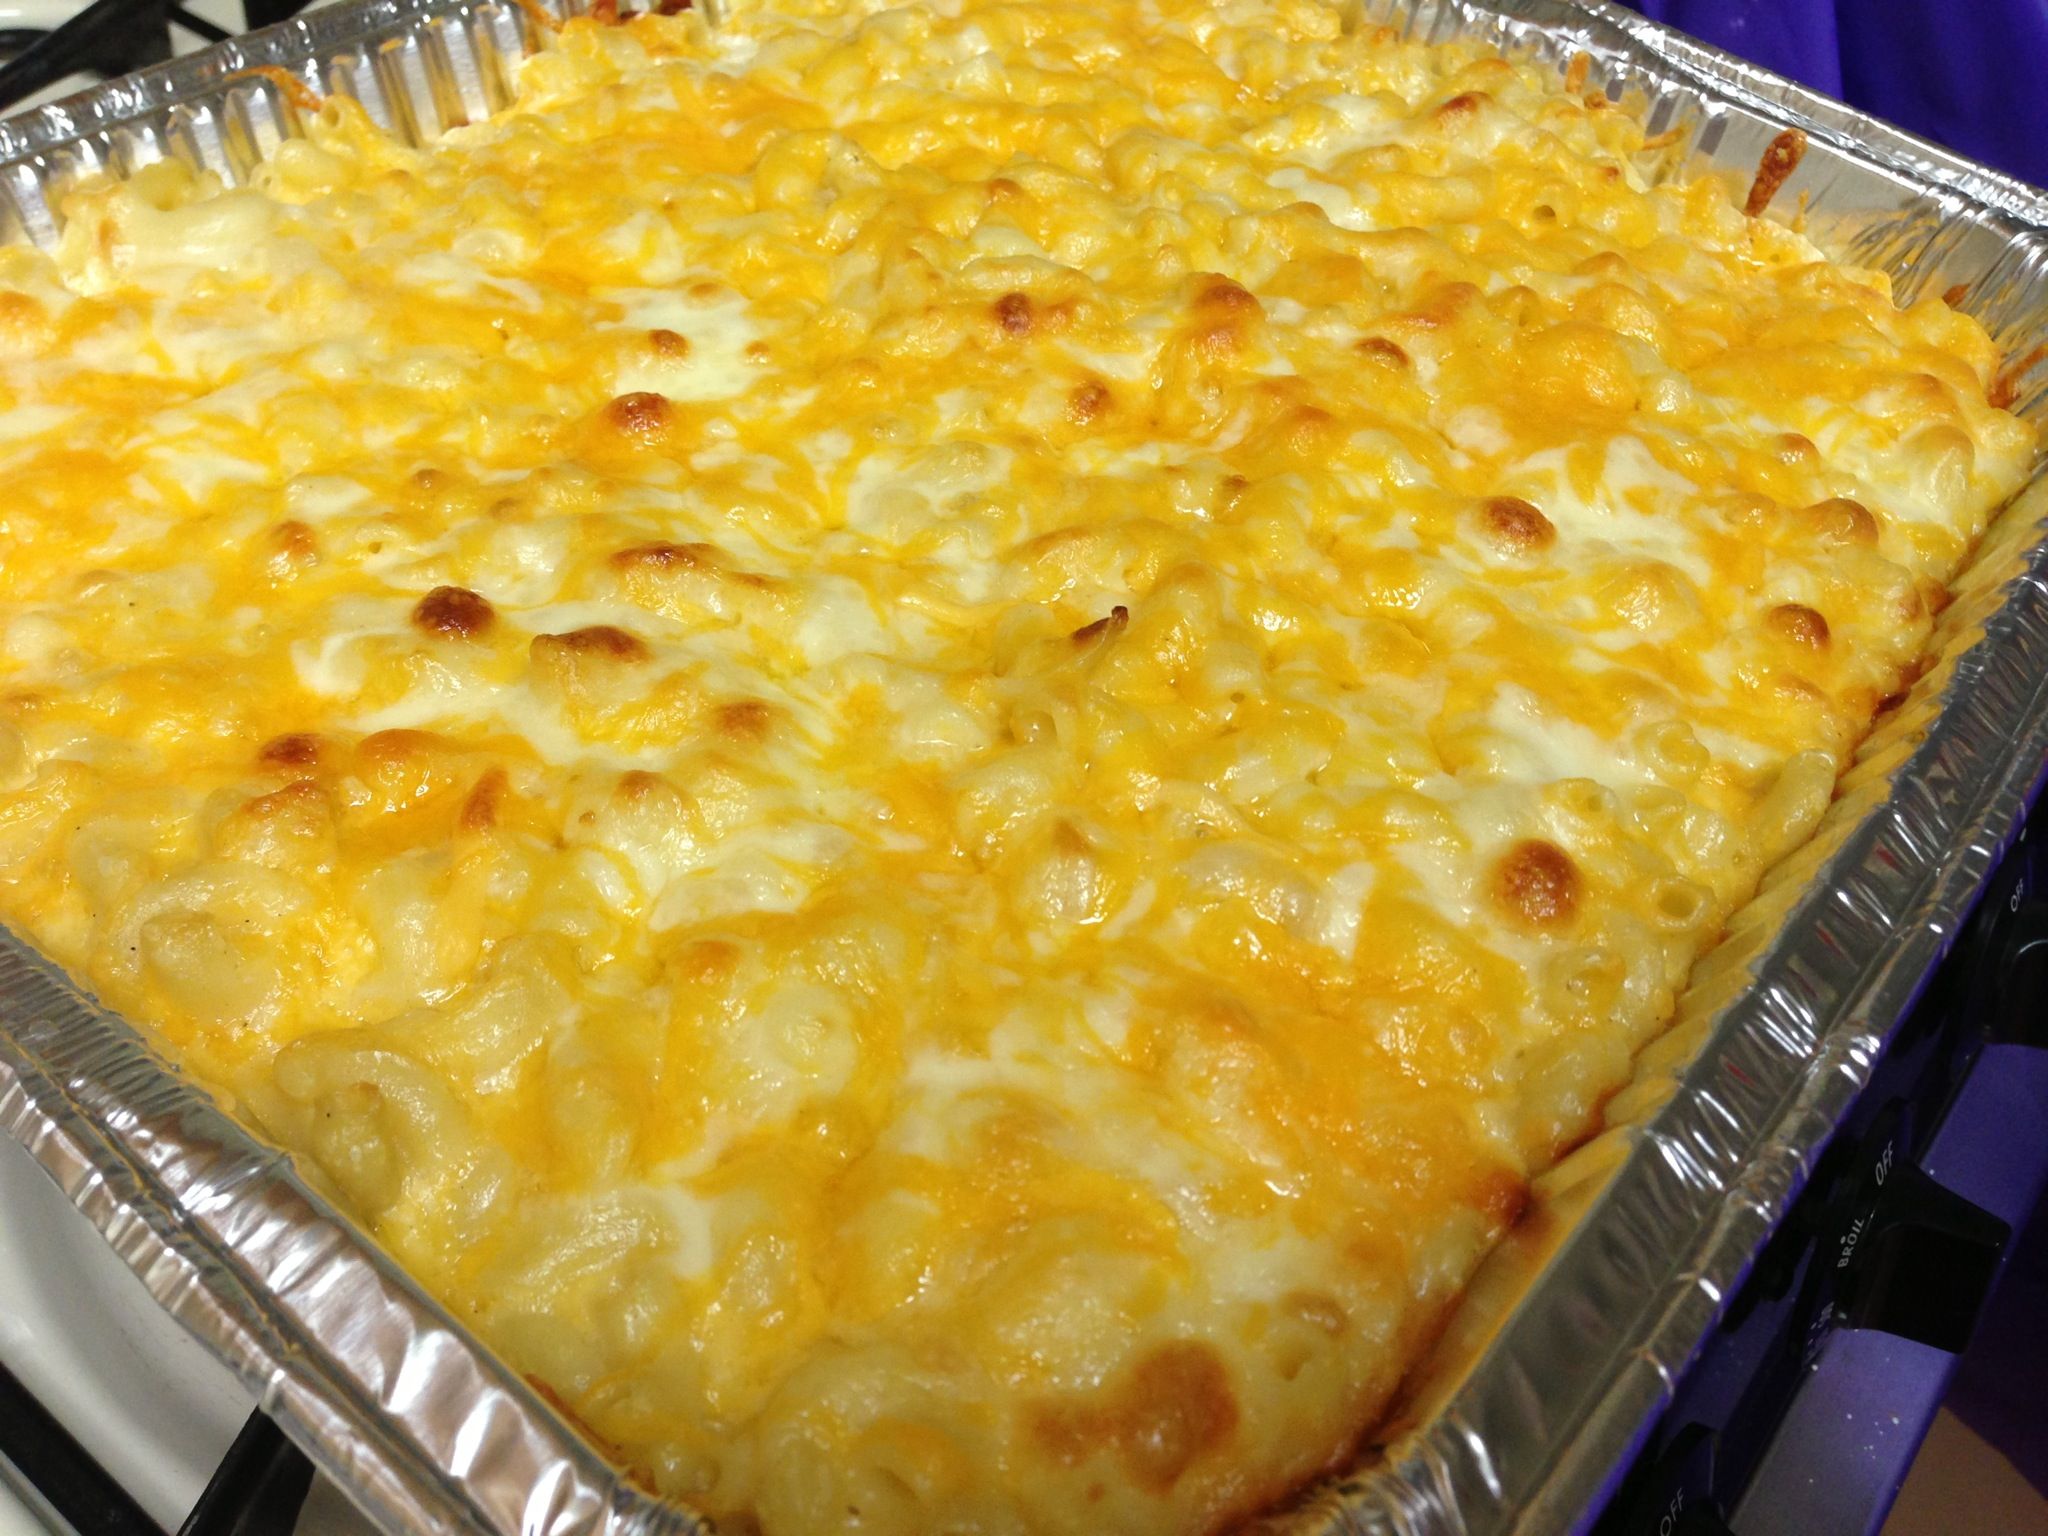 Recipe for baked macaroni and cheese